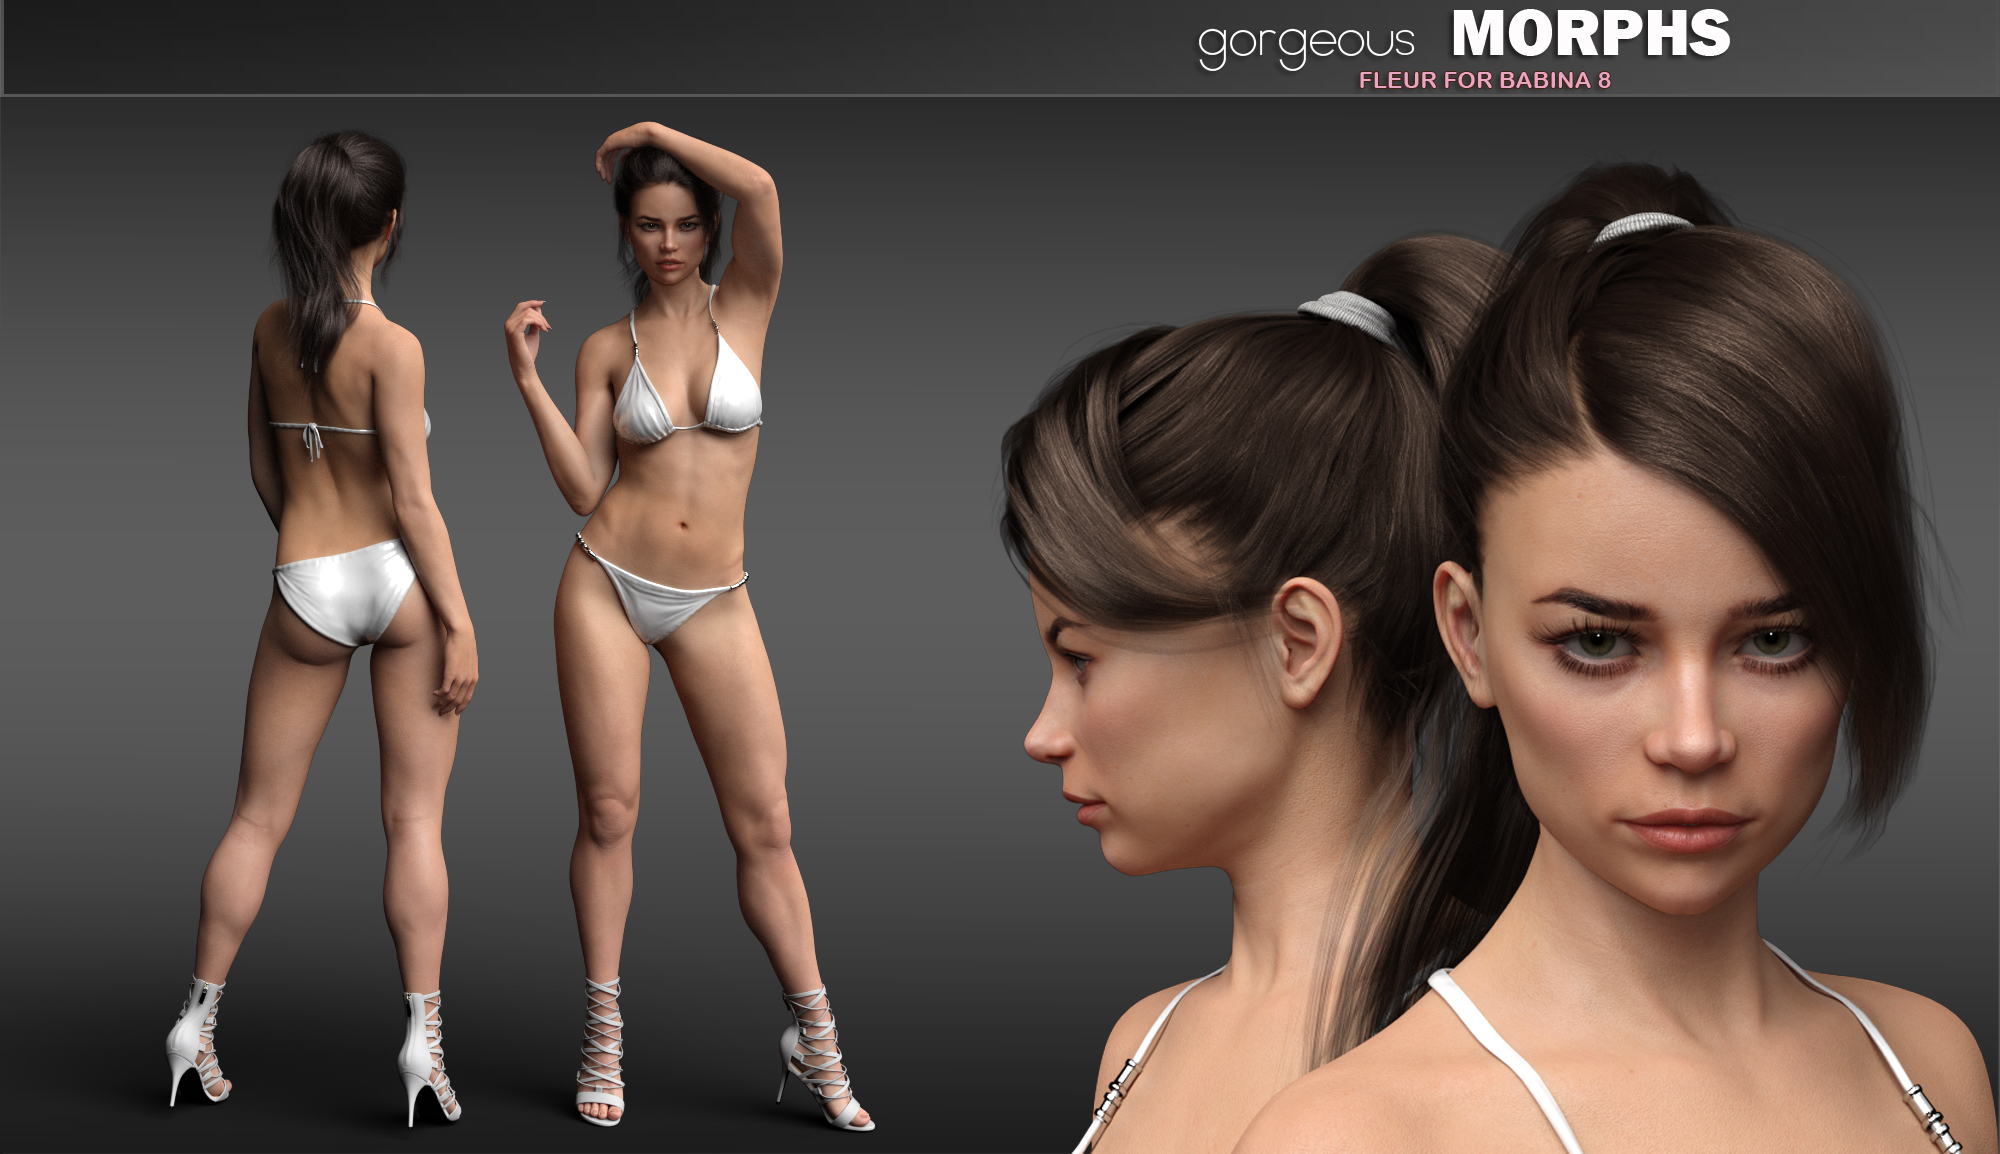 Gorgeous Morphs for Babina 8 by: P3Design, 3D Models by Daz 3D